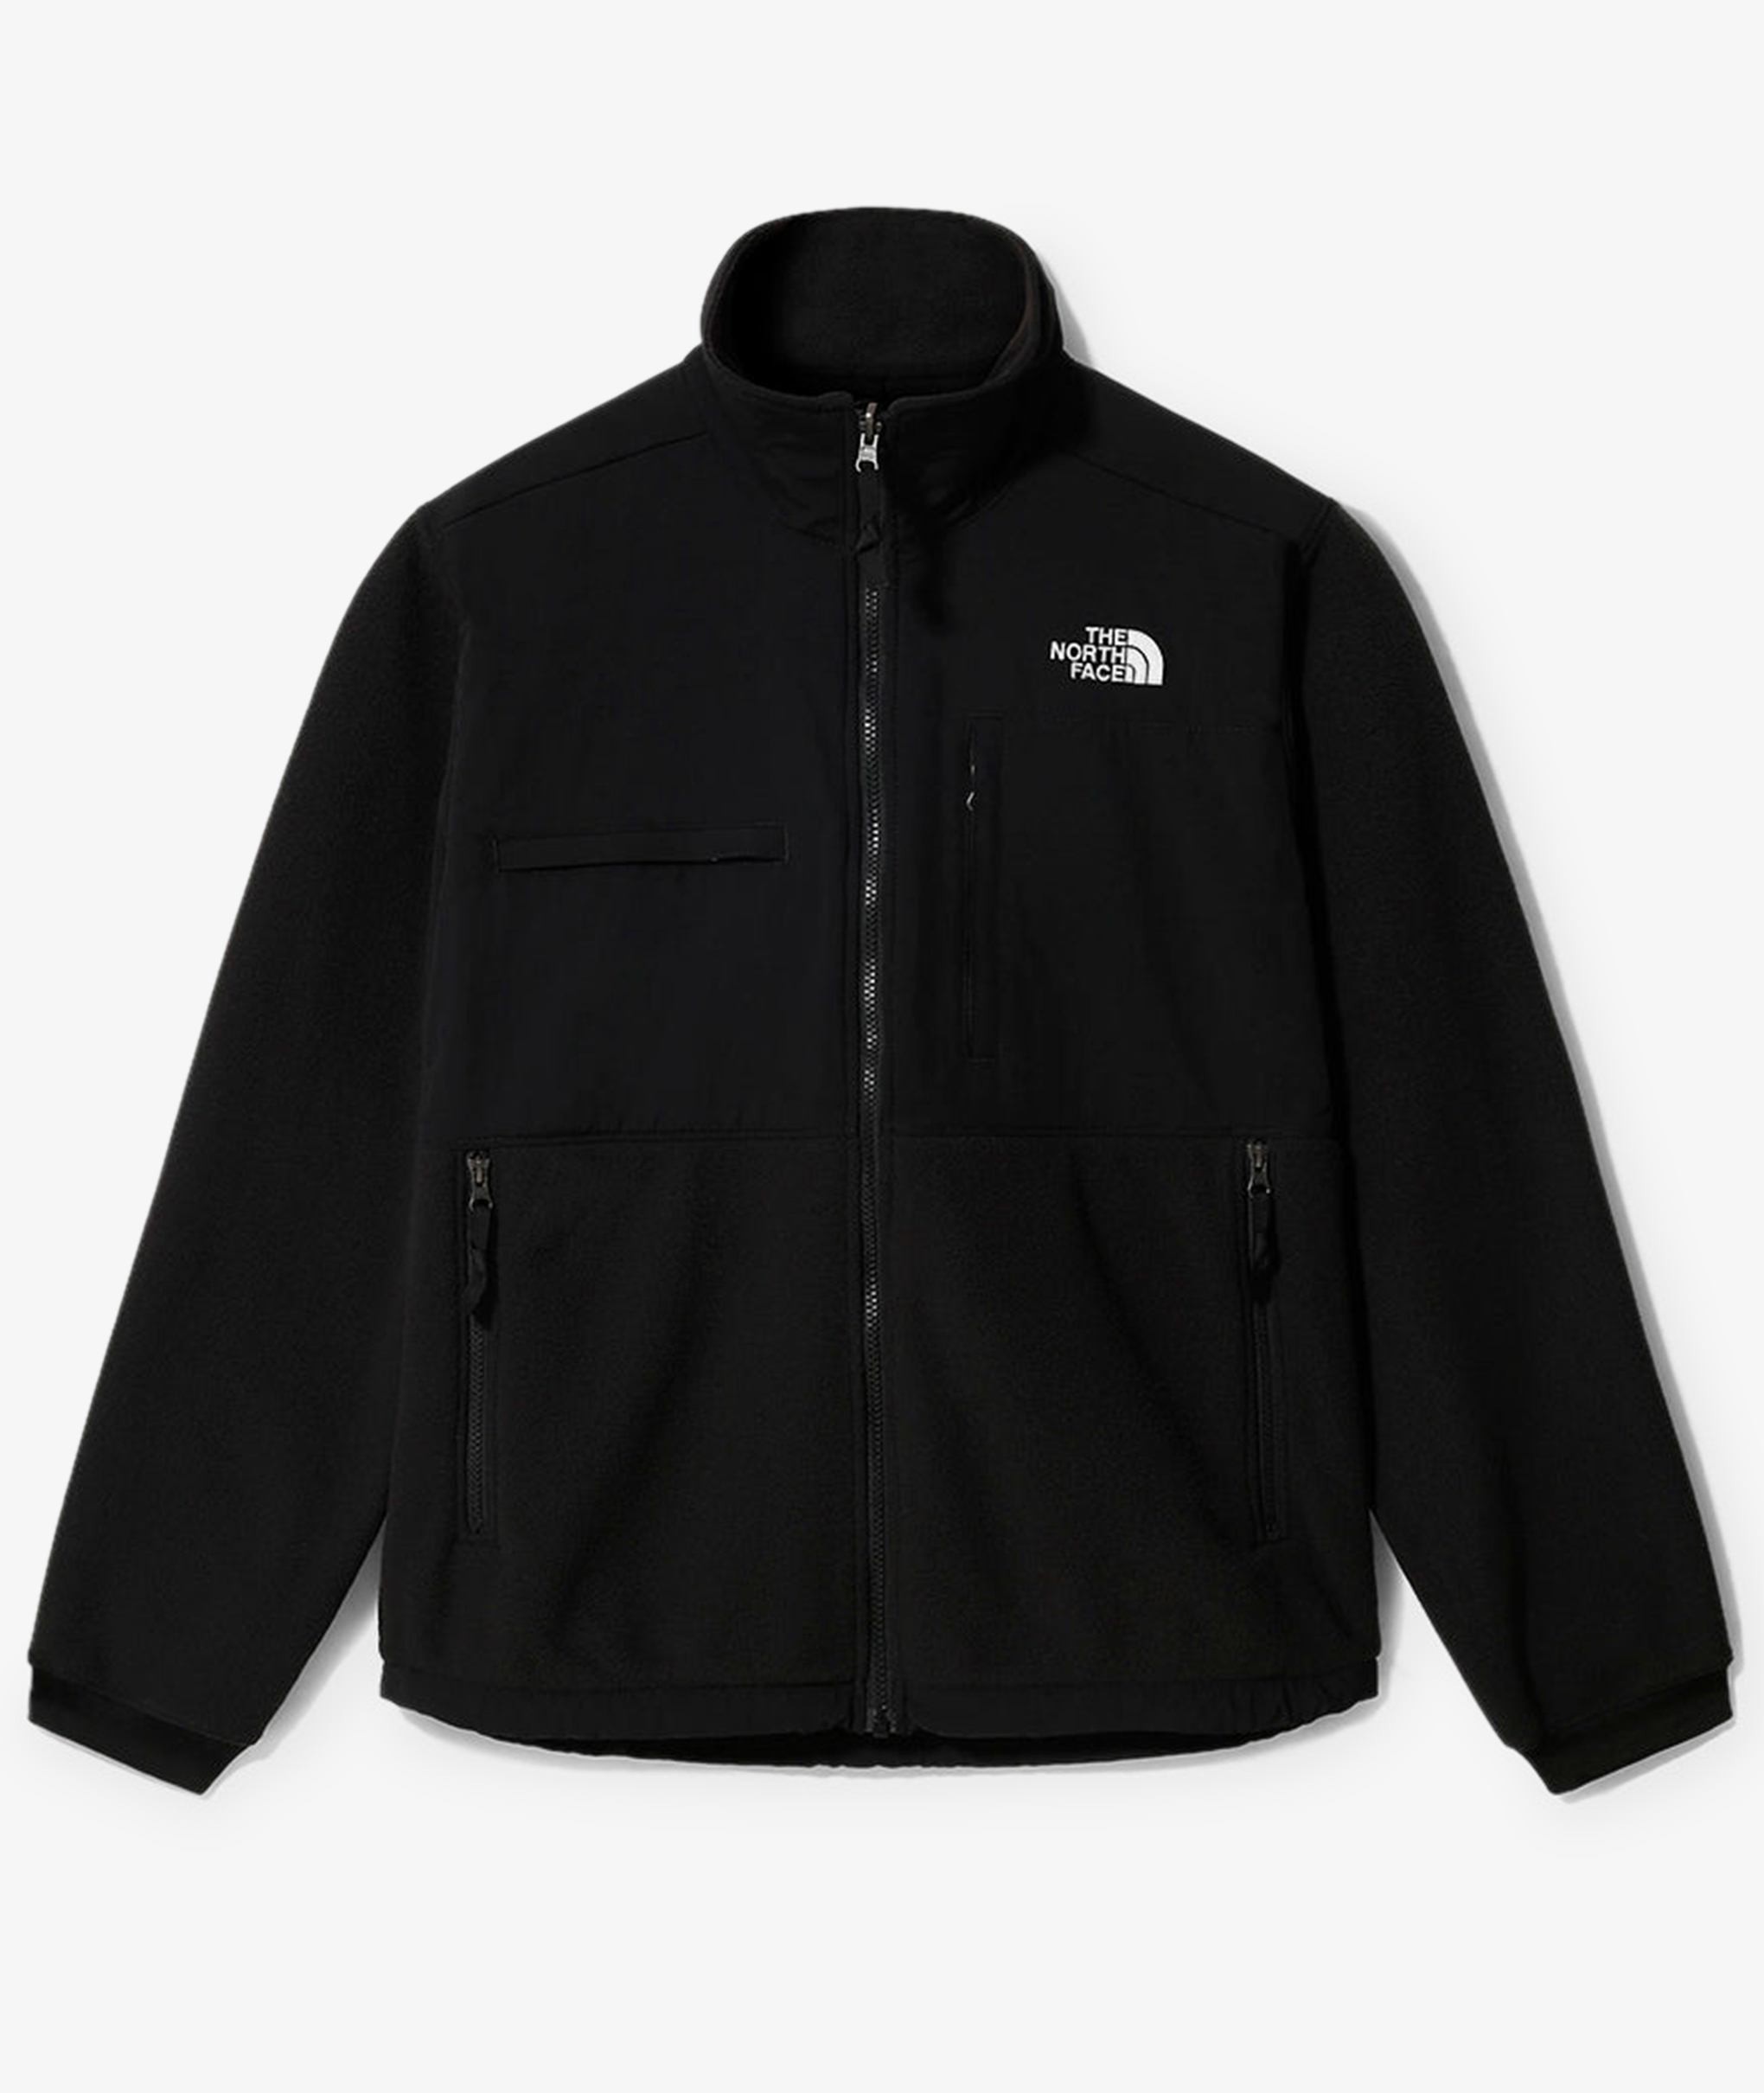 Norse Store | Shipping Worldwide - The North Face Denali Jacket 